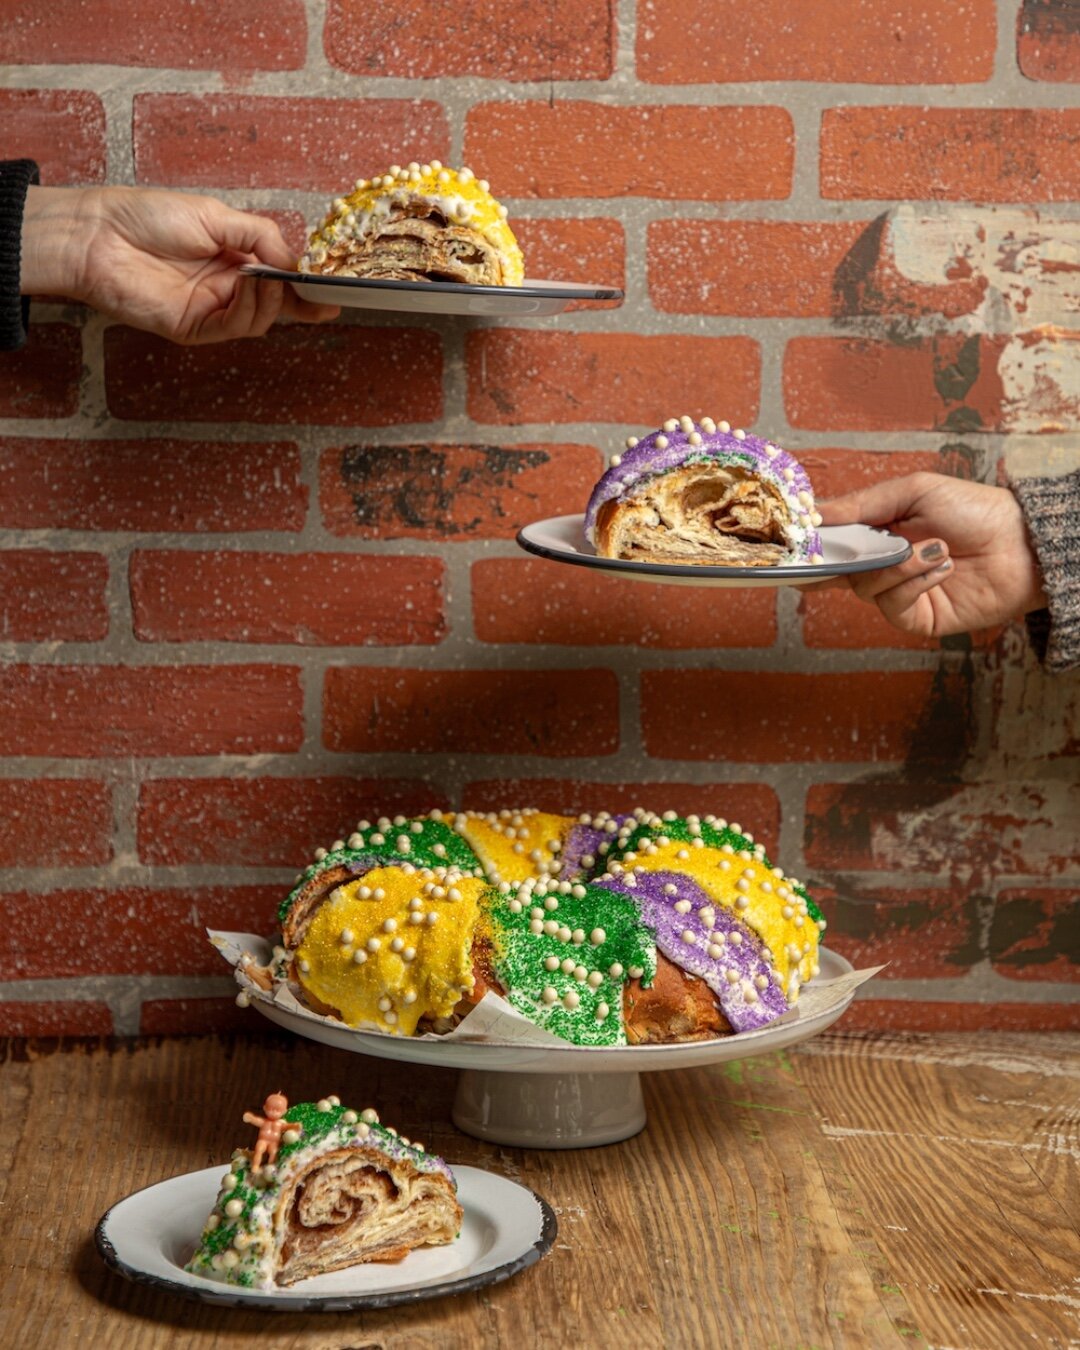 Please don&rsquo;t say King Cake season is almost over💔 We&rsquo;re going to savor every slice until February 13th! 
Click the link in our bio to place an order for one of our Caramel Crunch King Cakes!